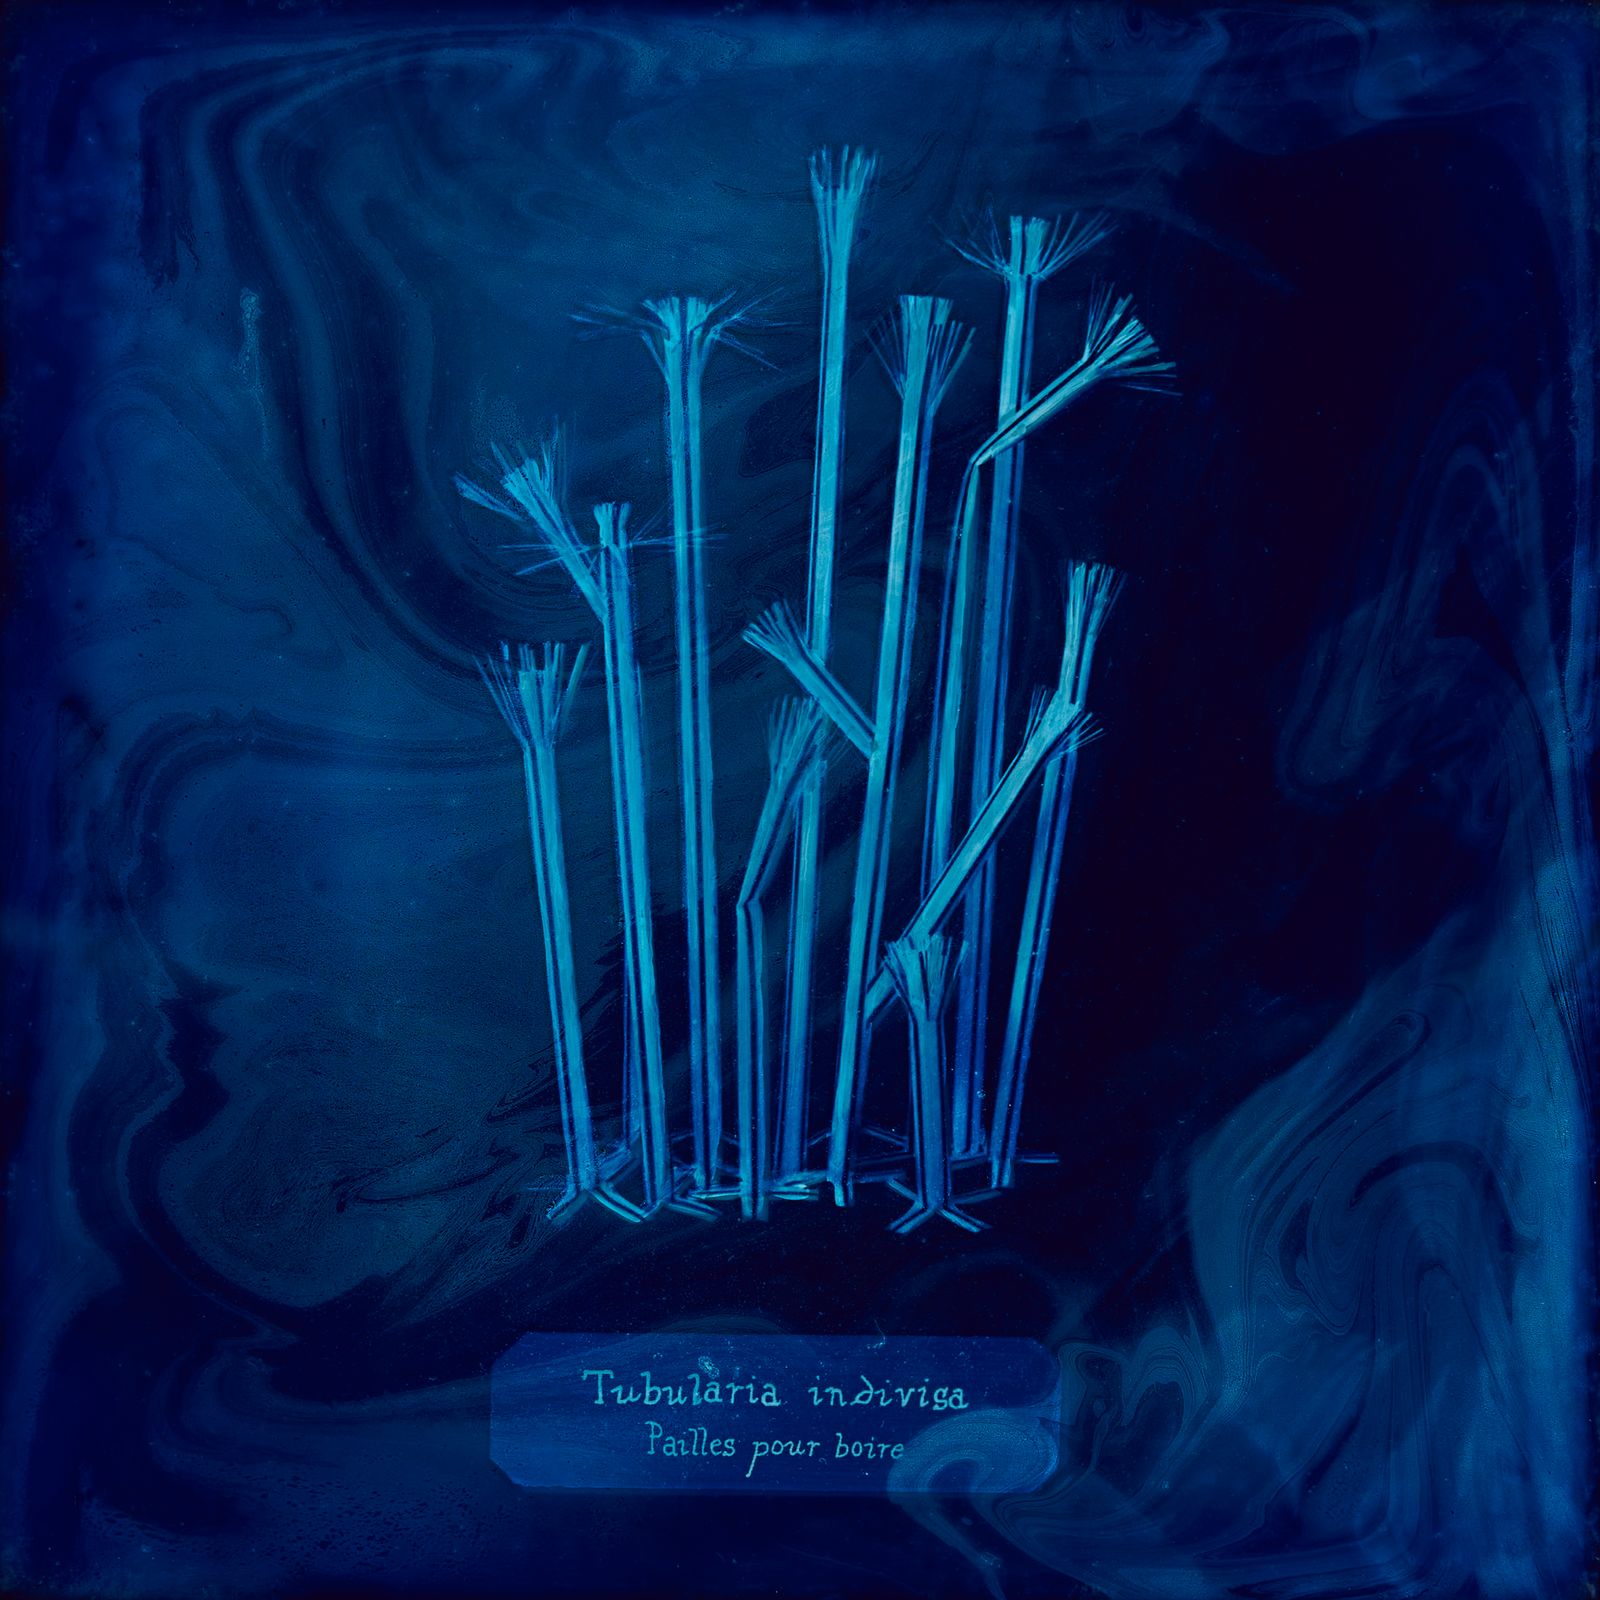 © Manon Lanjouère - Tubularia indivisa, Drinking straws, Cyanotype on glass and fluorescent vynil emulsion, 20x20 cm